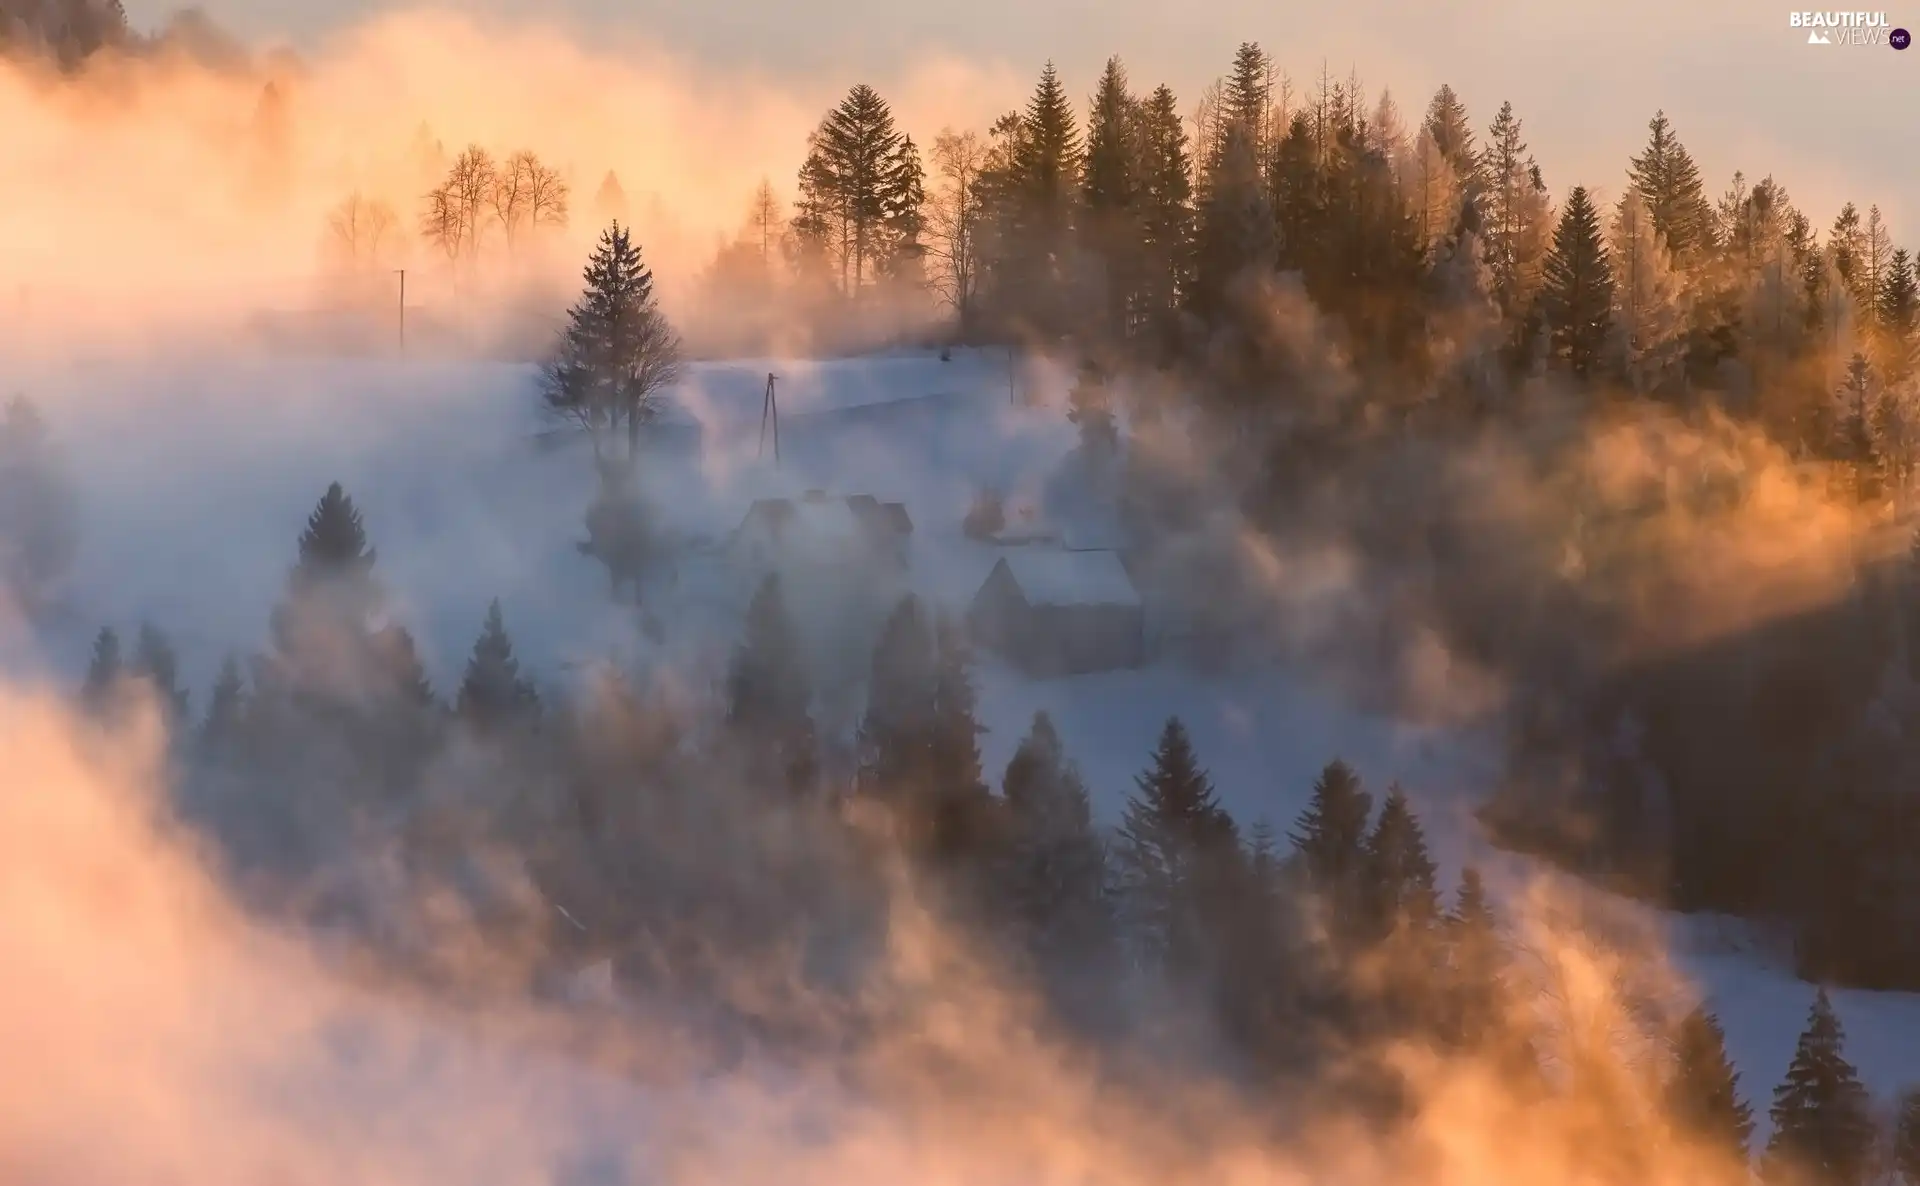 Mountains, winter, viewes, Houses, trees, Fog